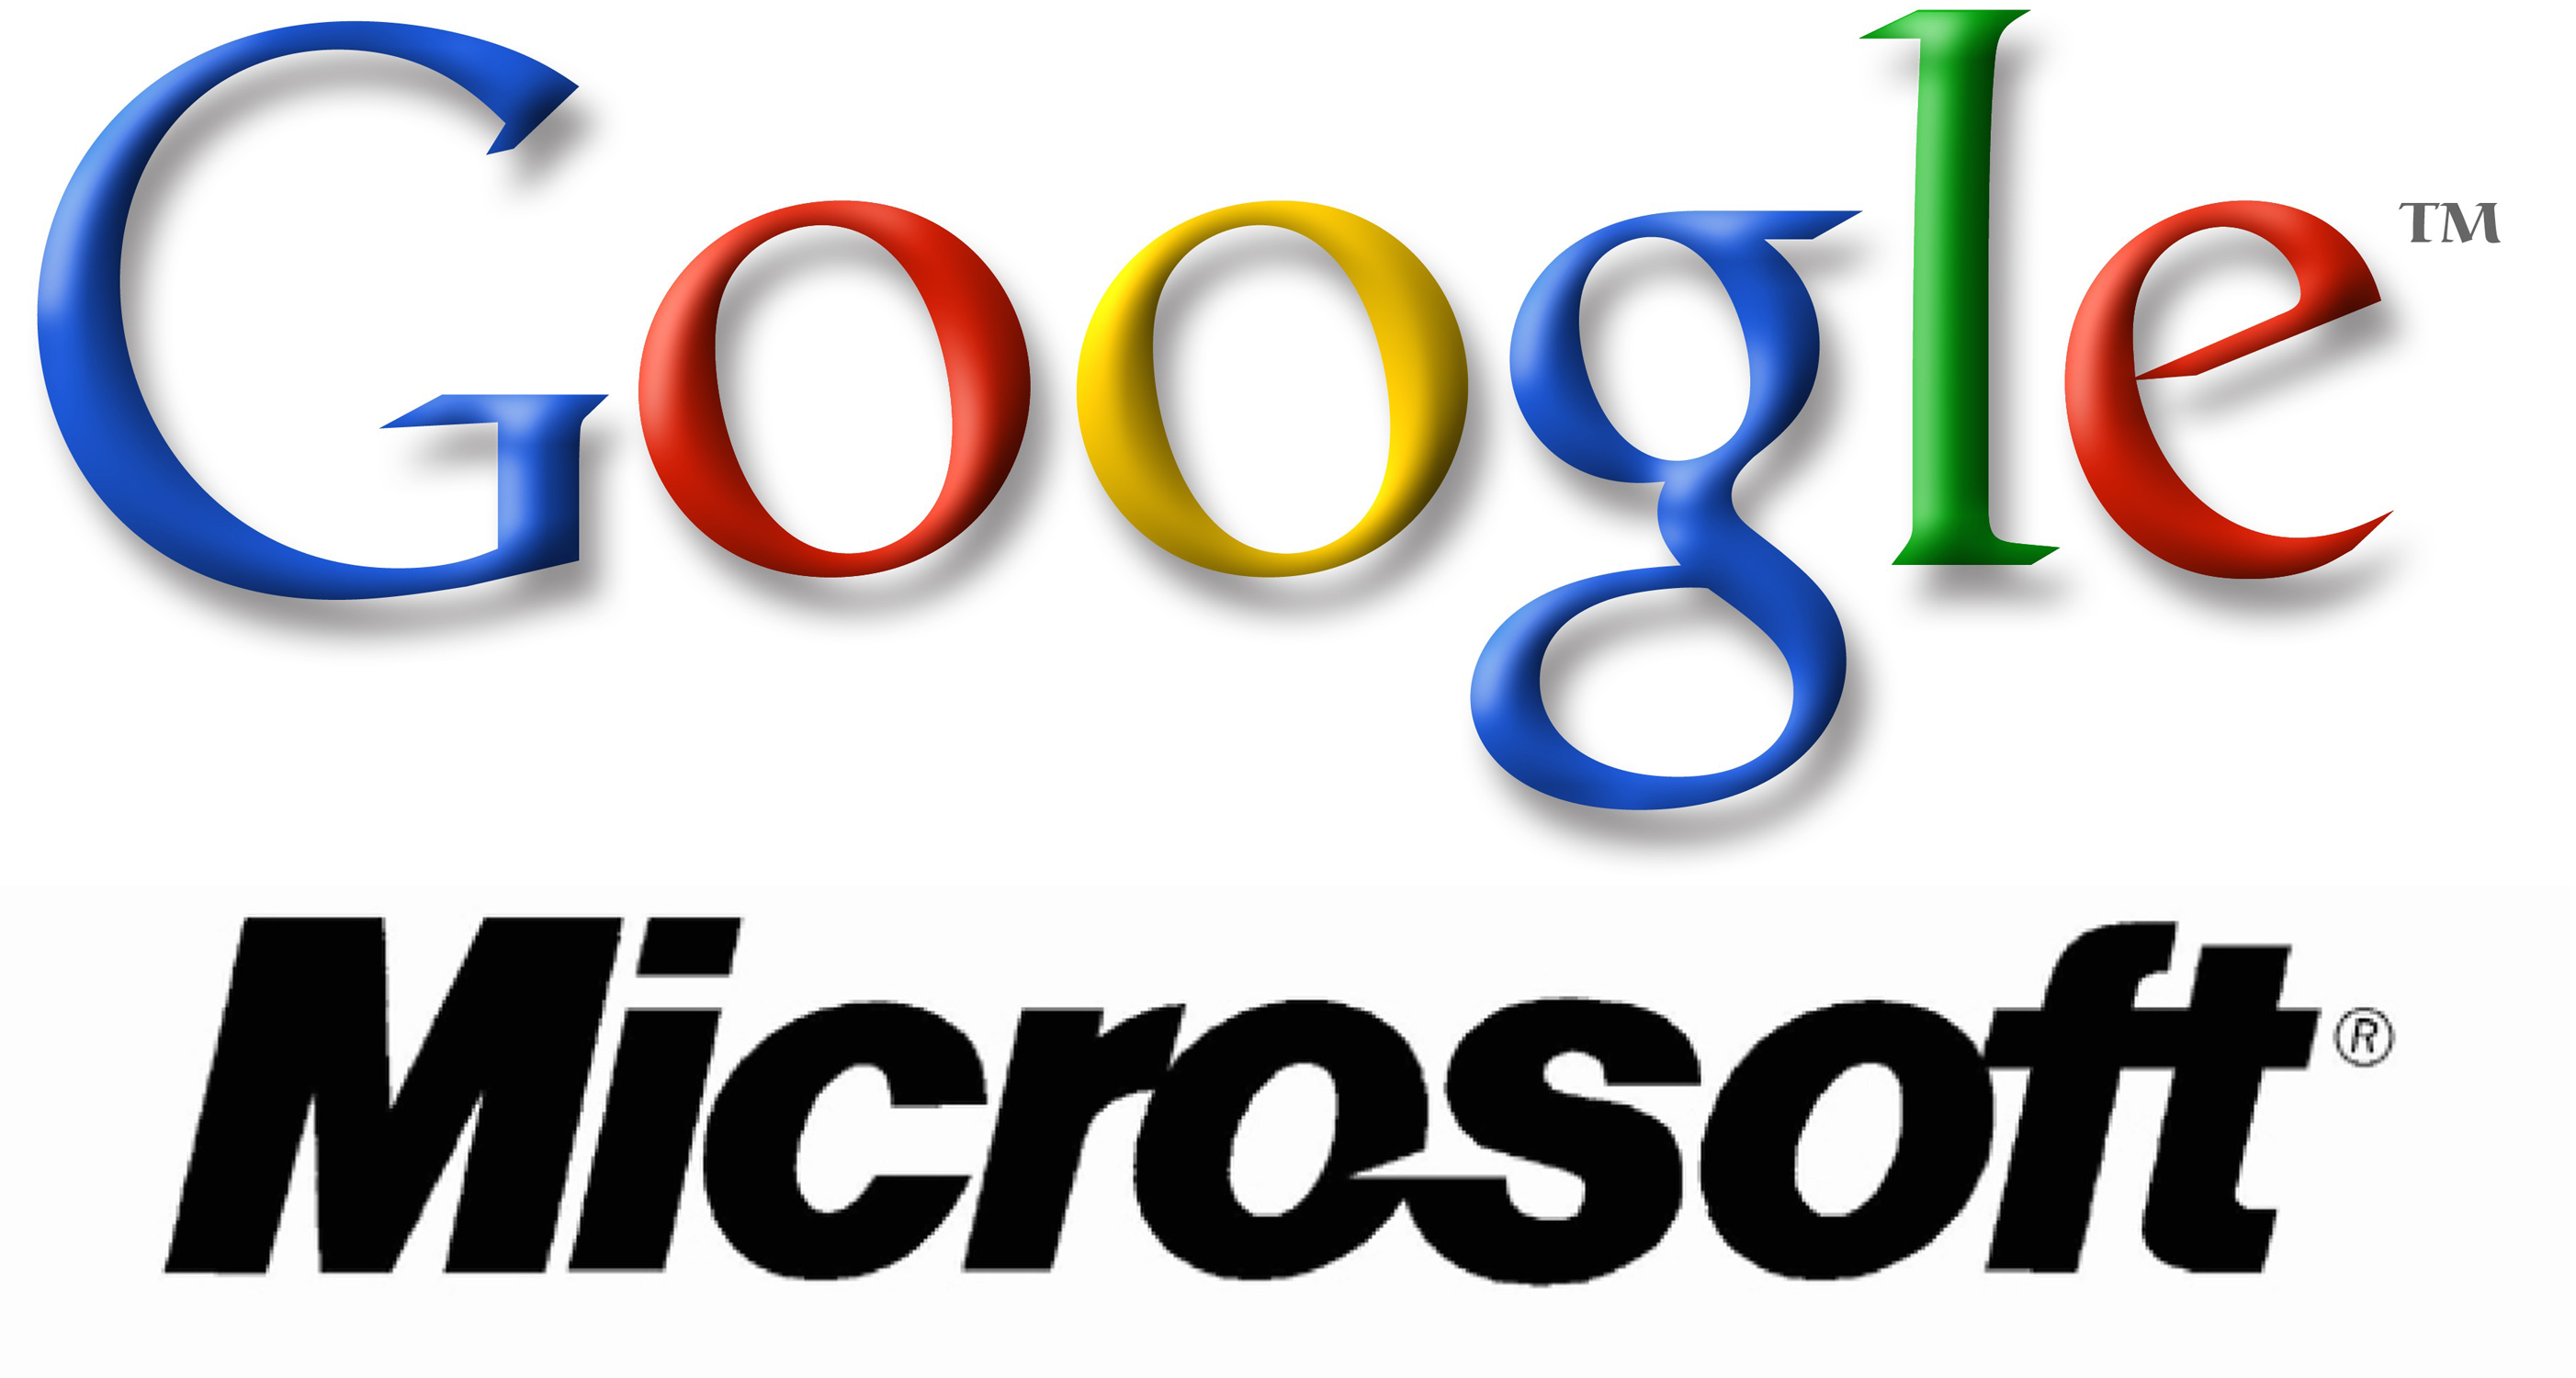 Google Claim Microsoft to Earn $94 Billion From Their Patent